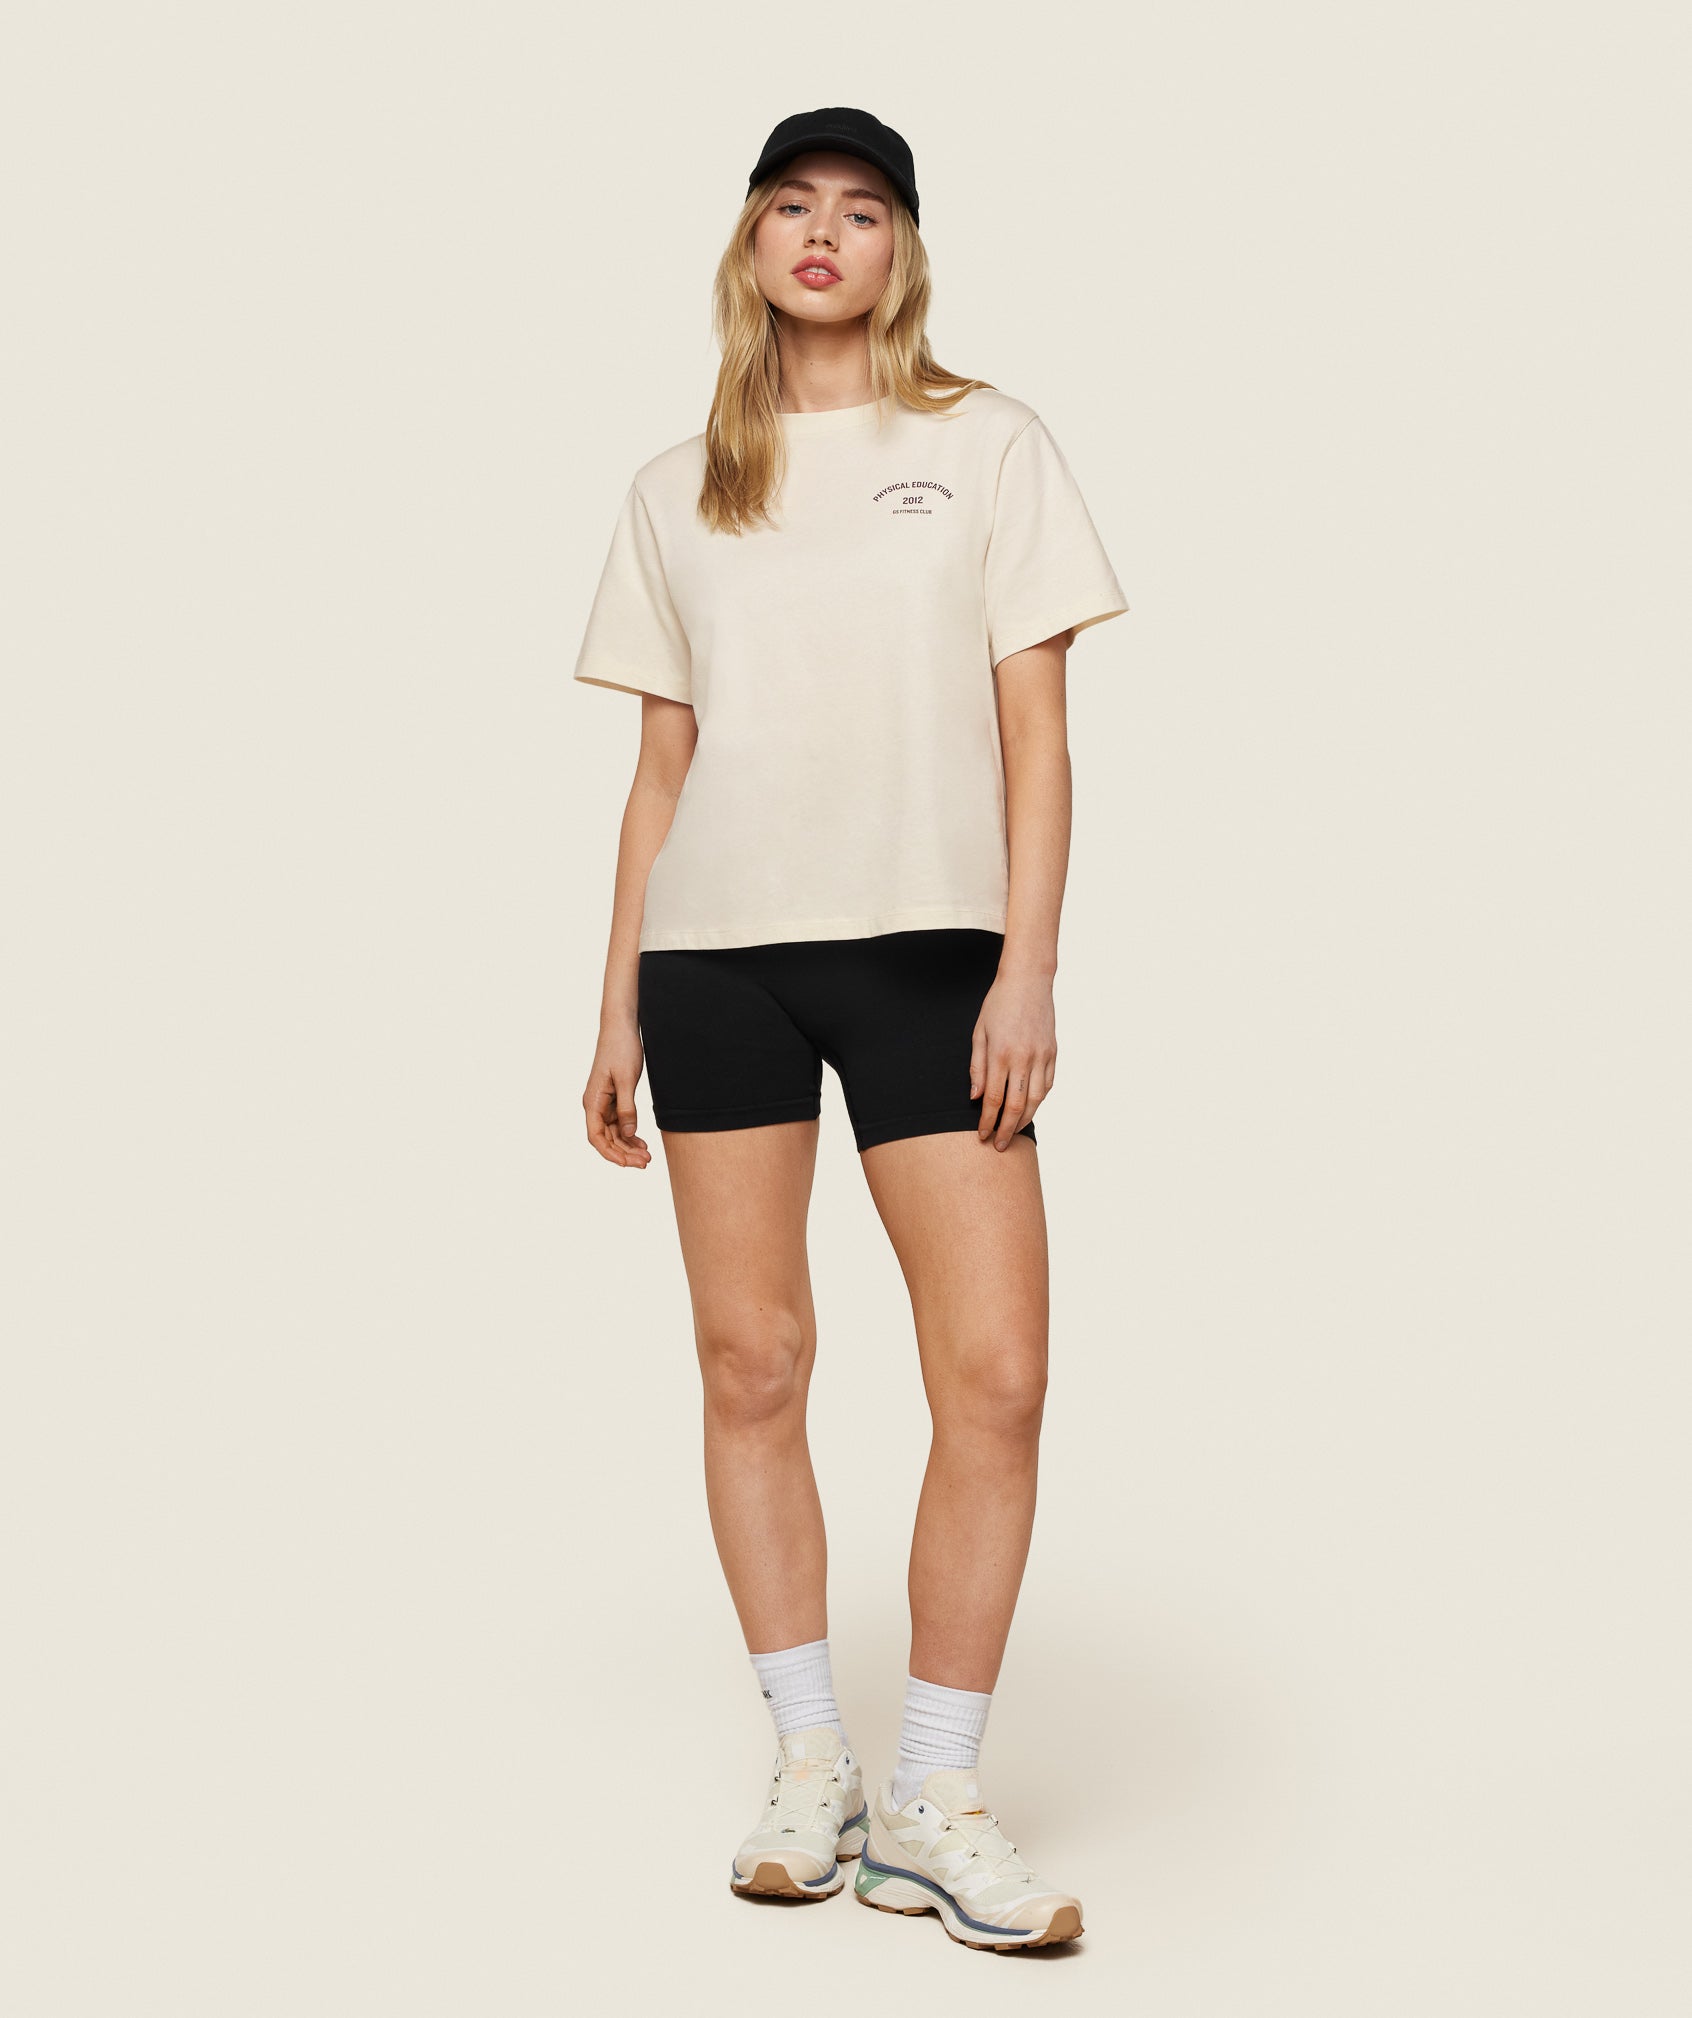 Phys Ed Graphic T-Shirt in Ecru White/Archive Brown - view 3